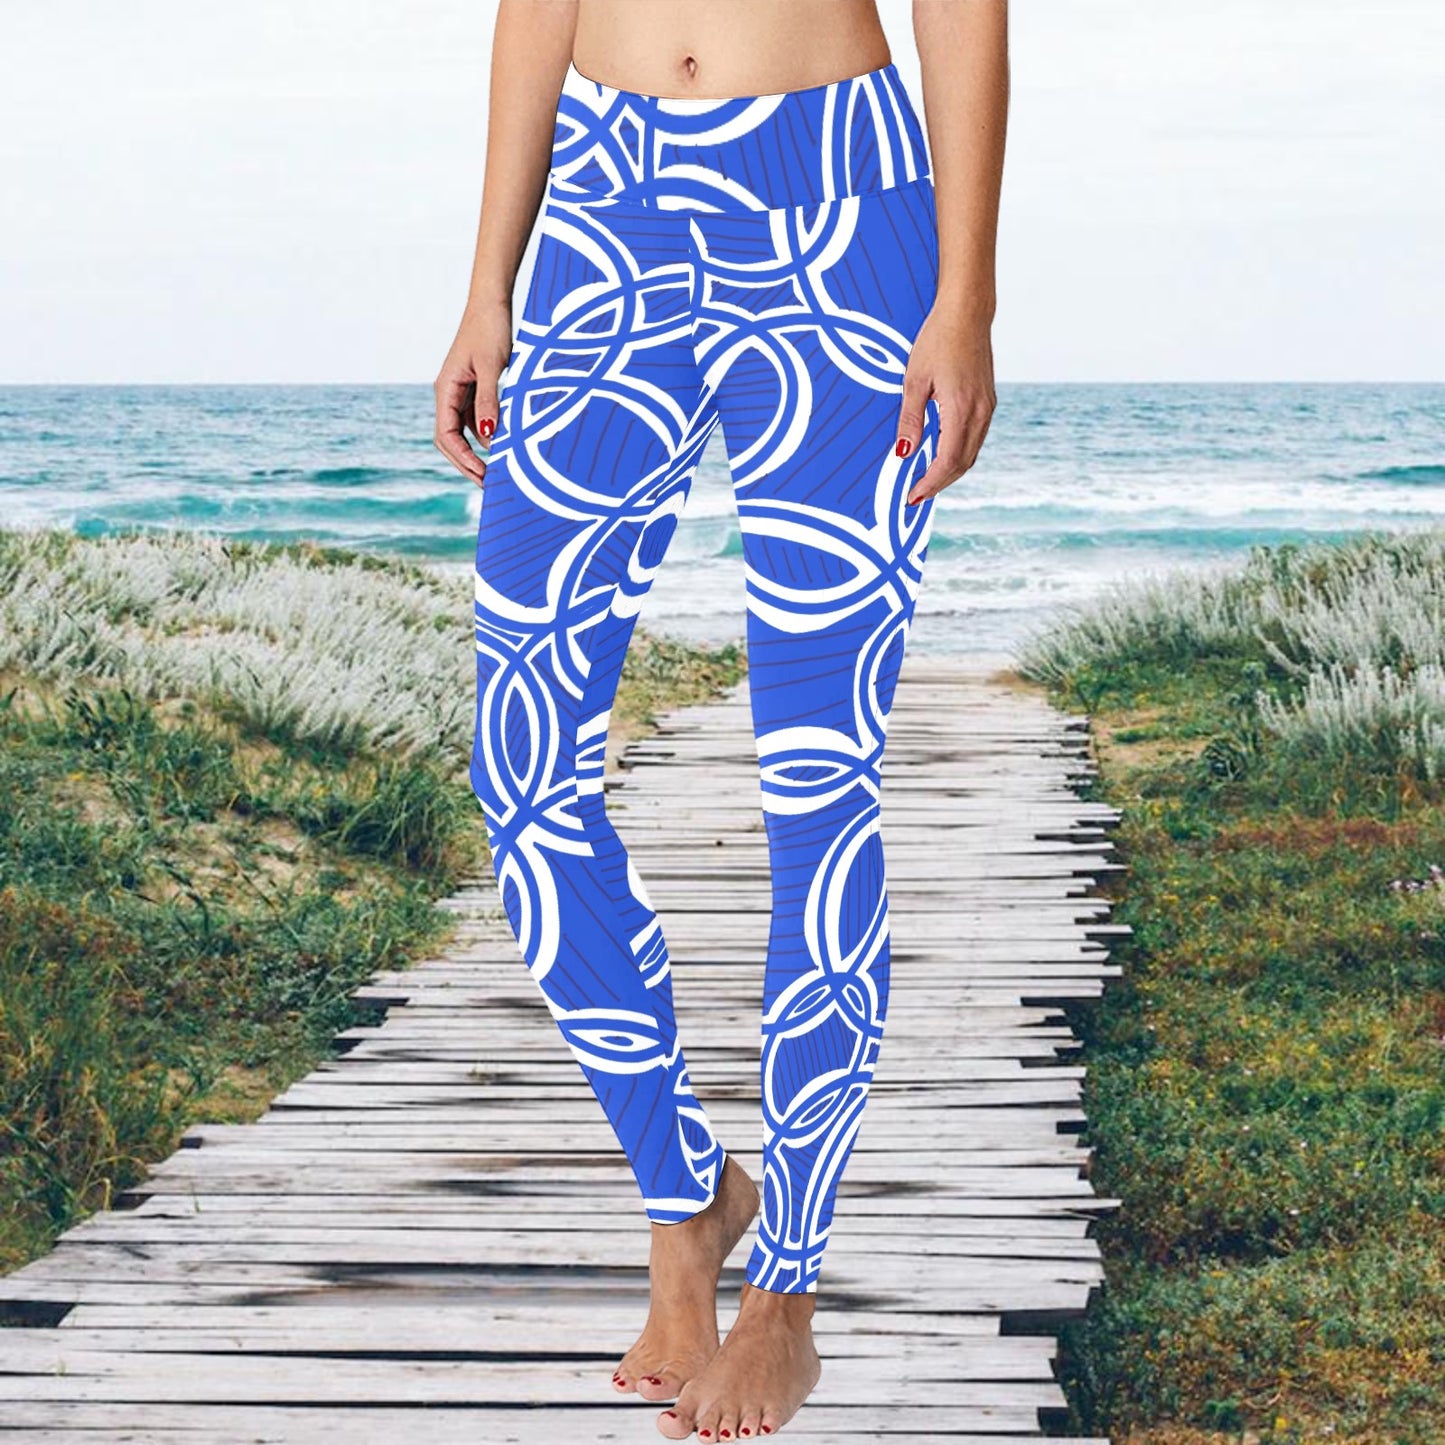 Watercolor Workout Leggings. Houston Collection. Design hand-painted by the Designer Maria Alejandra Echenique